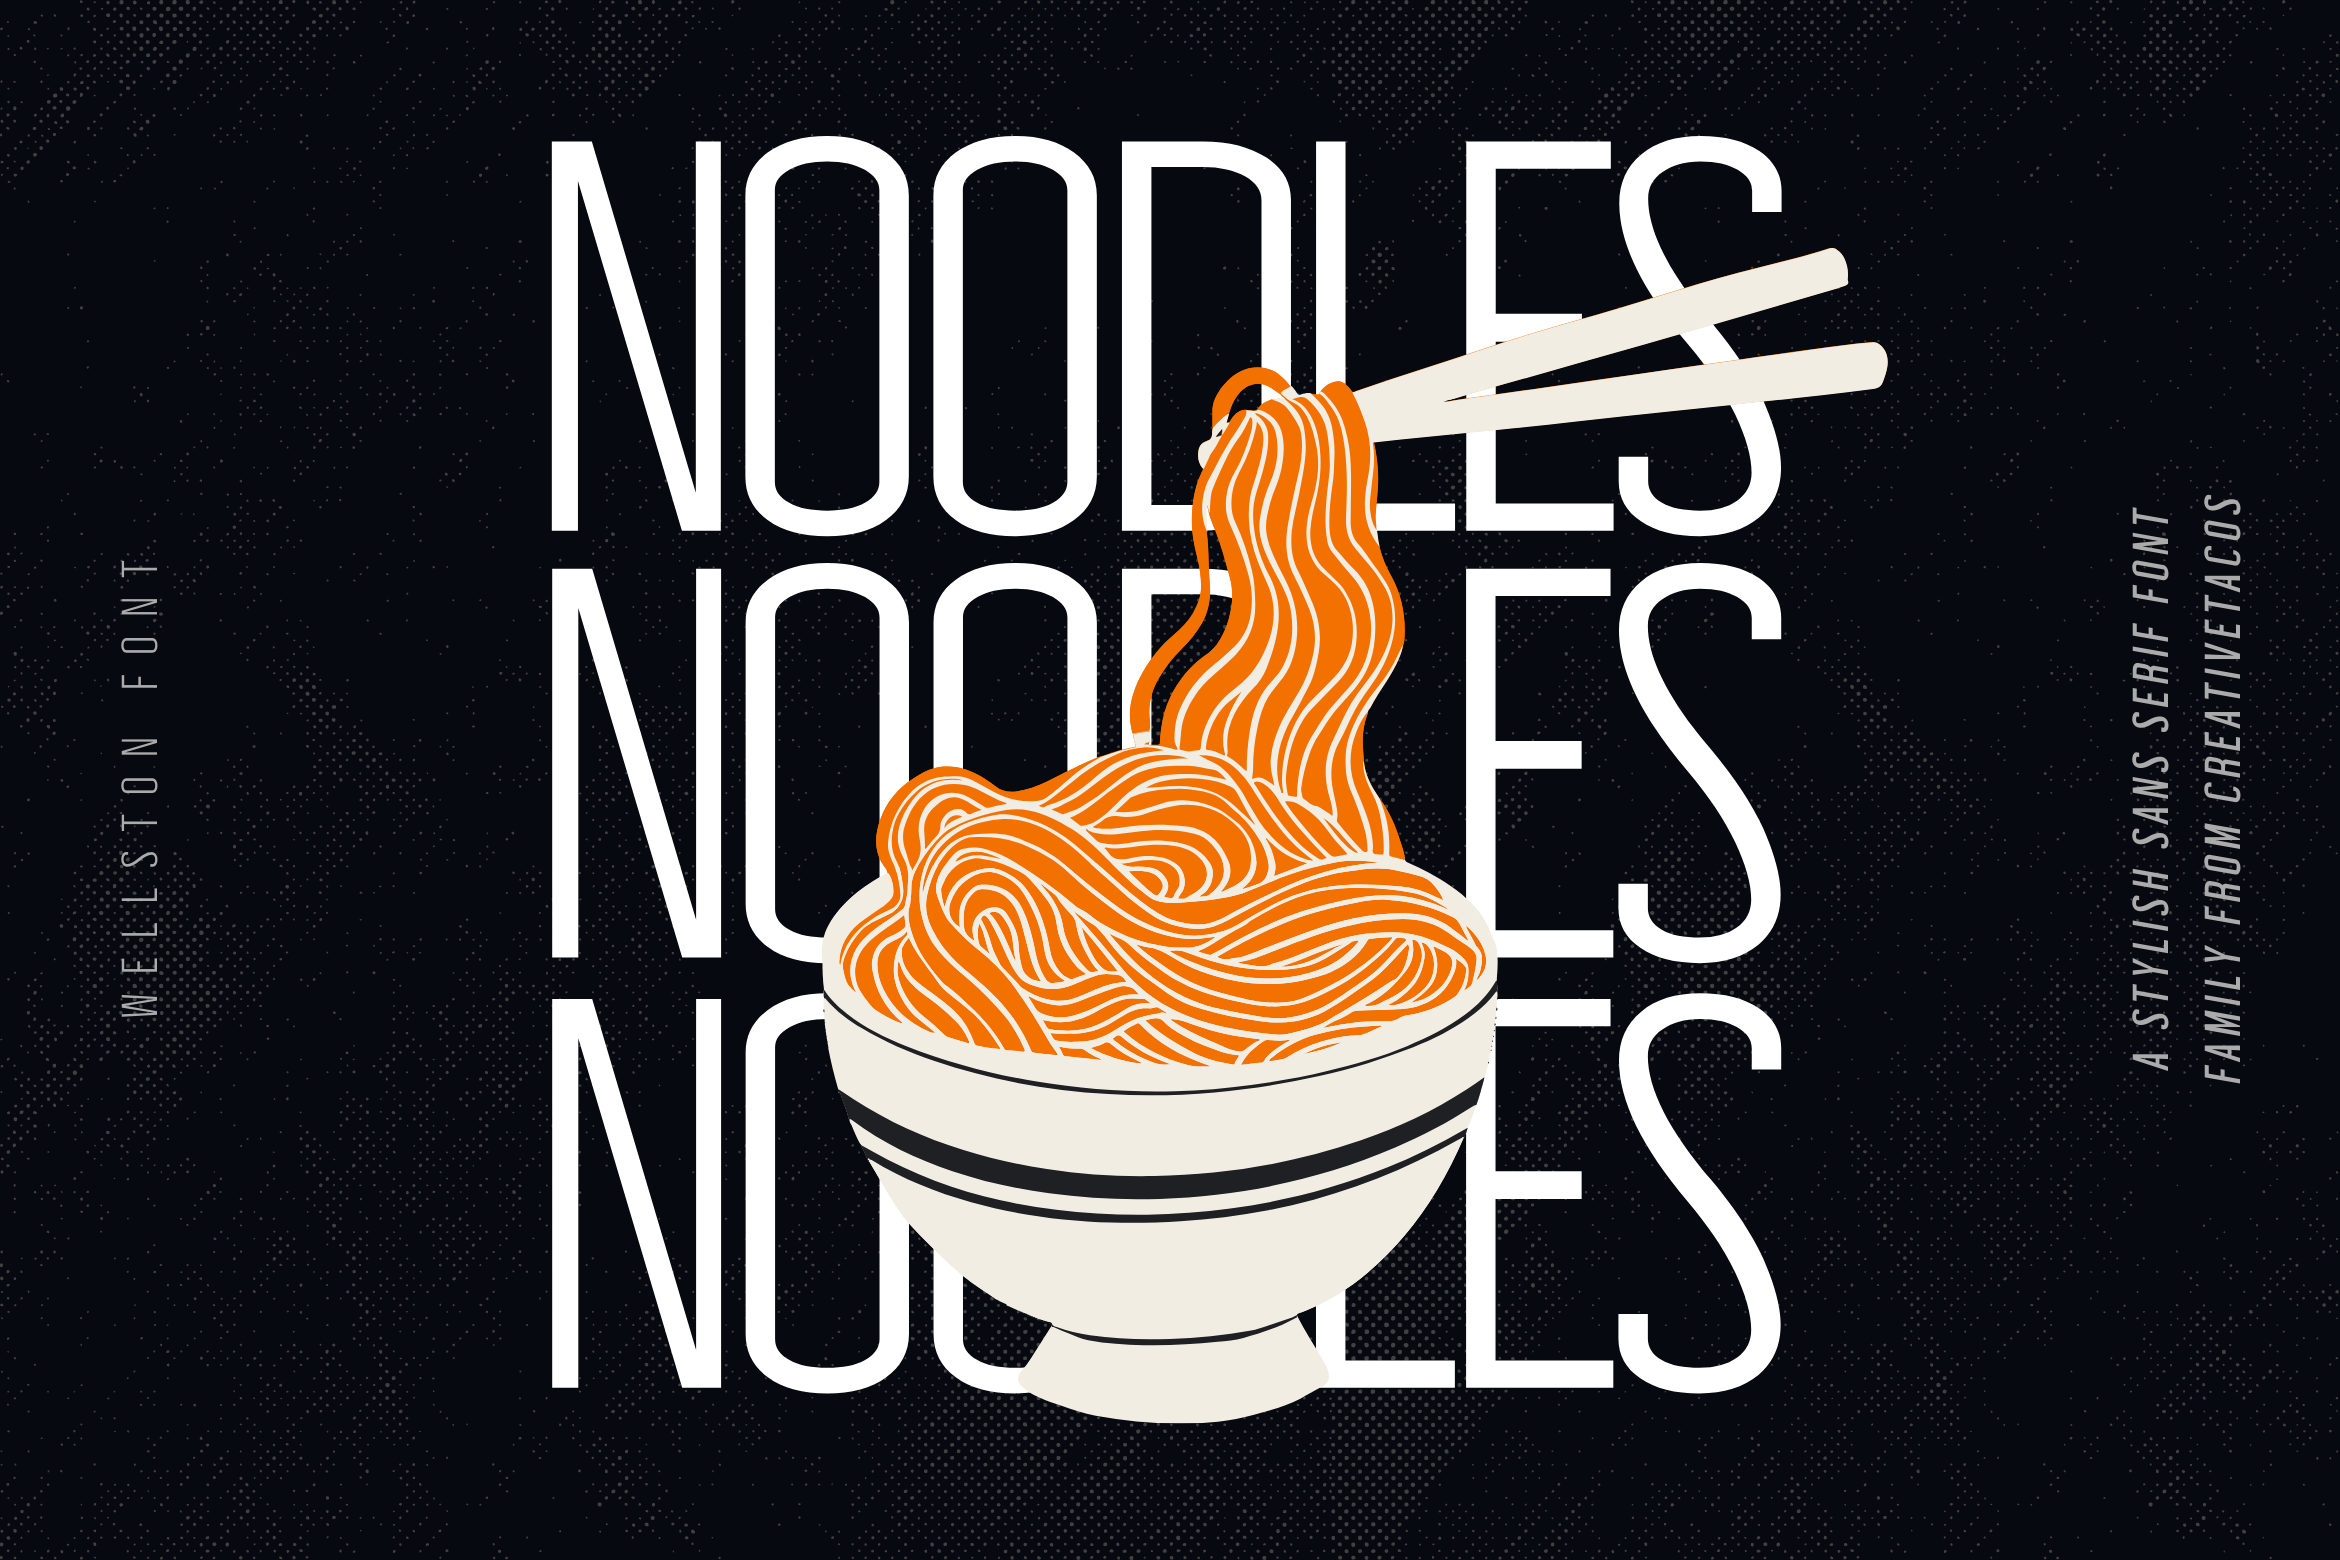 Graphic of a bowl of noodles with the word "NOODLES" in large letters, using Wellston font, in monochrome with an orange noodle highlight.